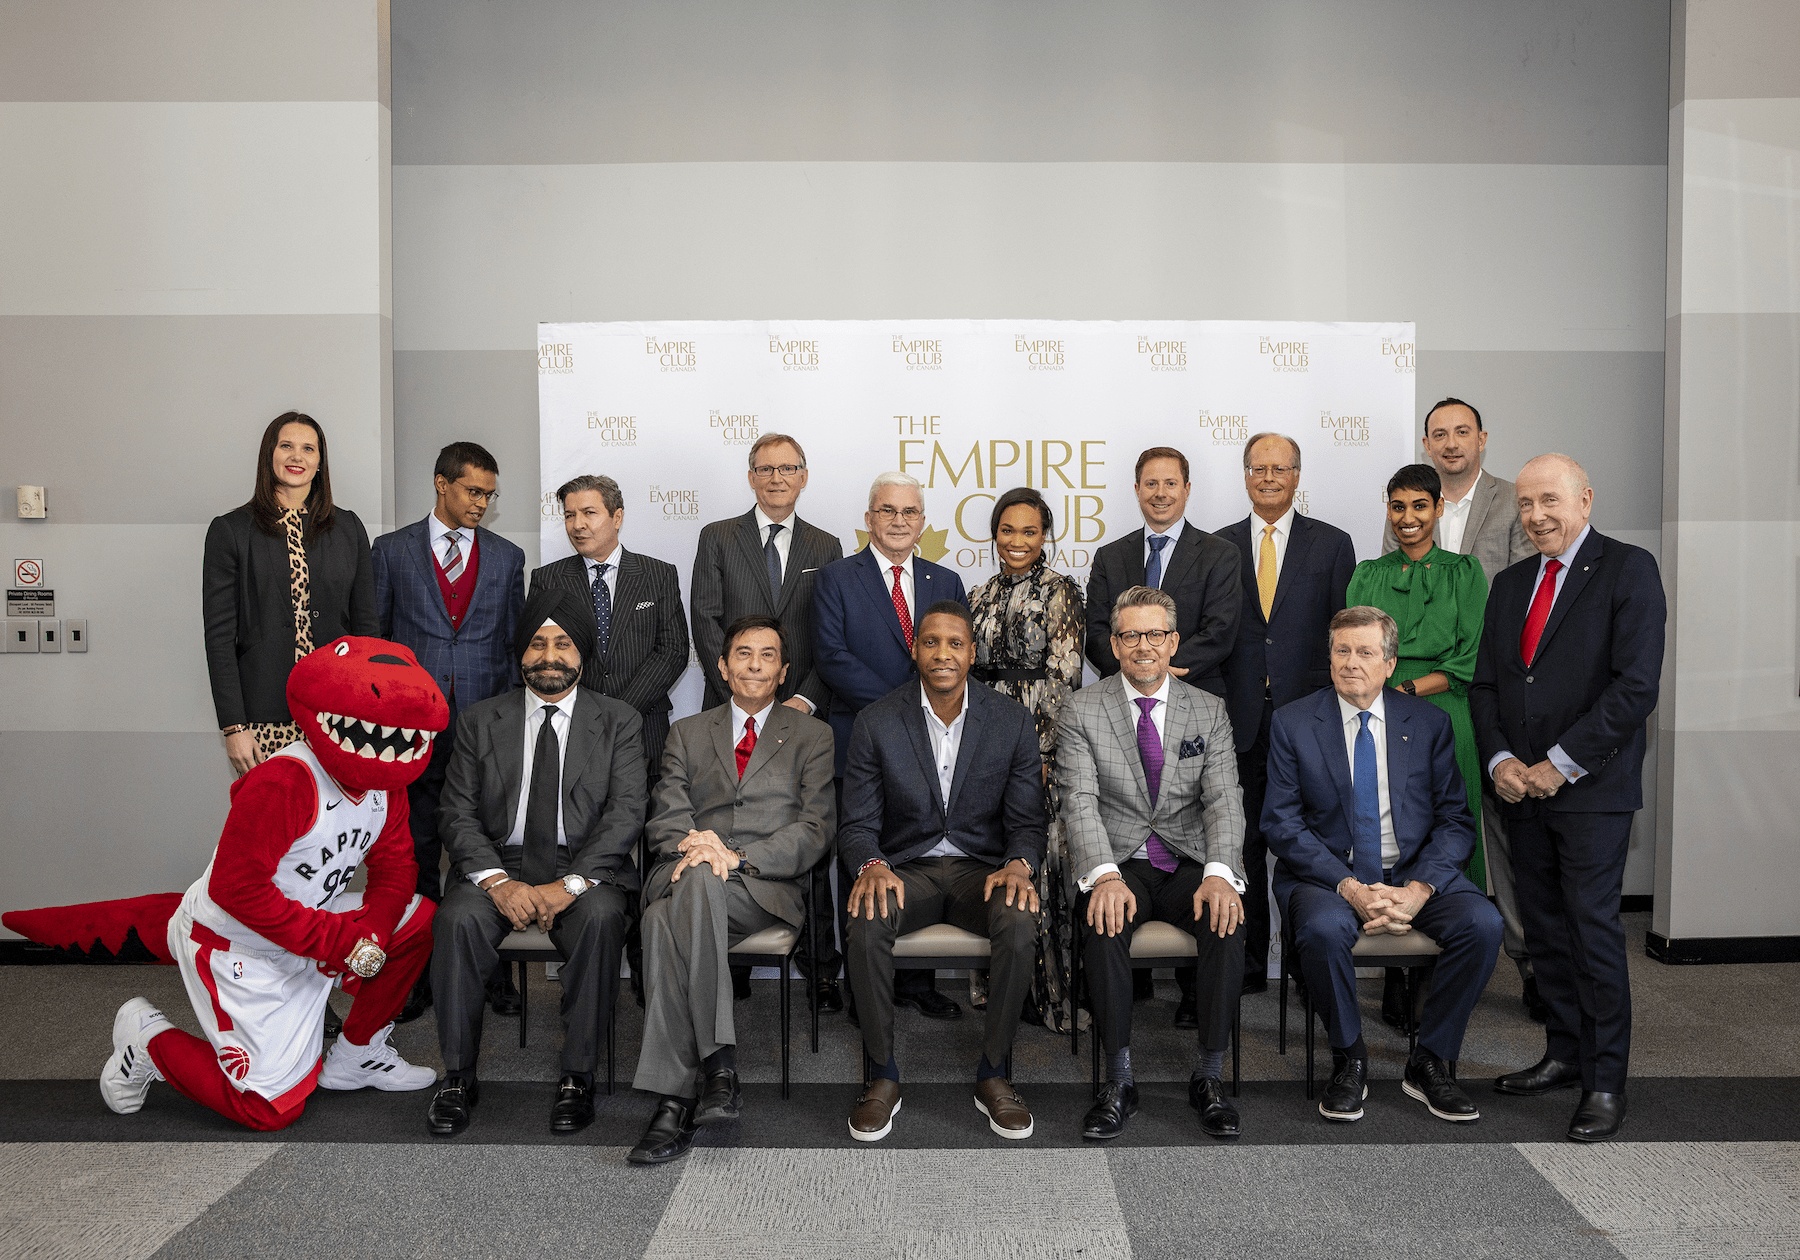 alt= Empire Club of Canada Directors and members smiling with the Toronto Raptors red raptor mascot in front of an event wall.